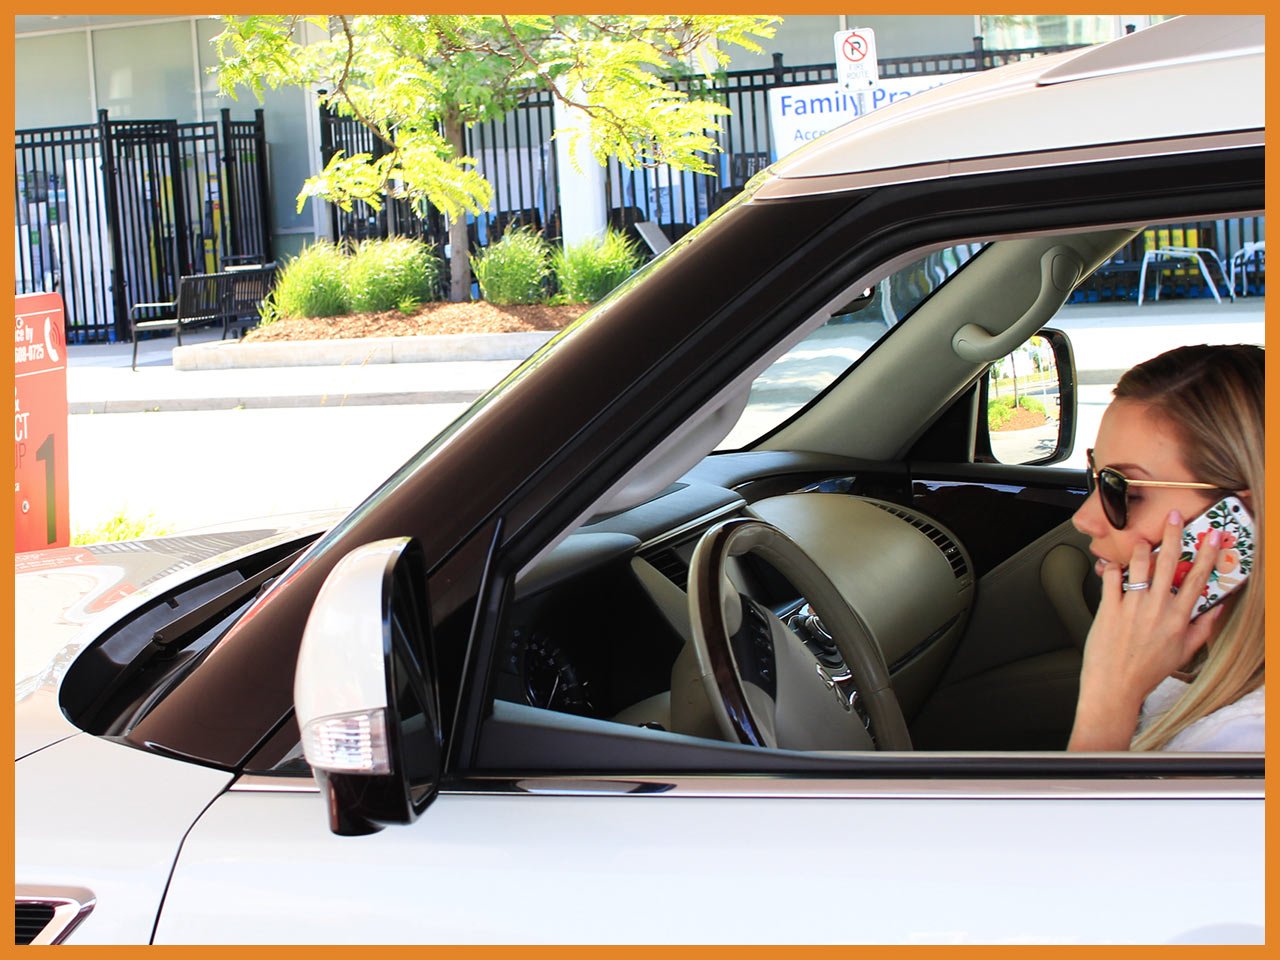 Joanna on the phone waiting in her car for her groceries to be delivered at the Loblaws Click & Collect pickup station